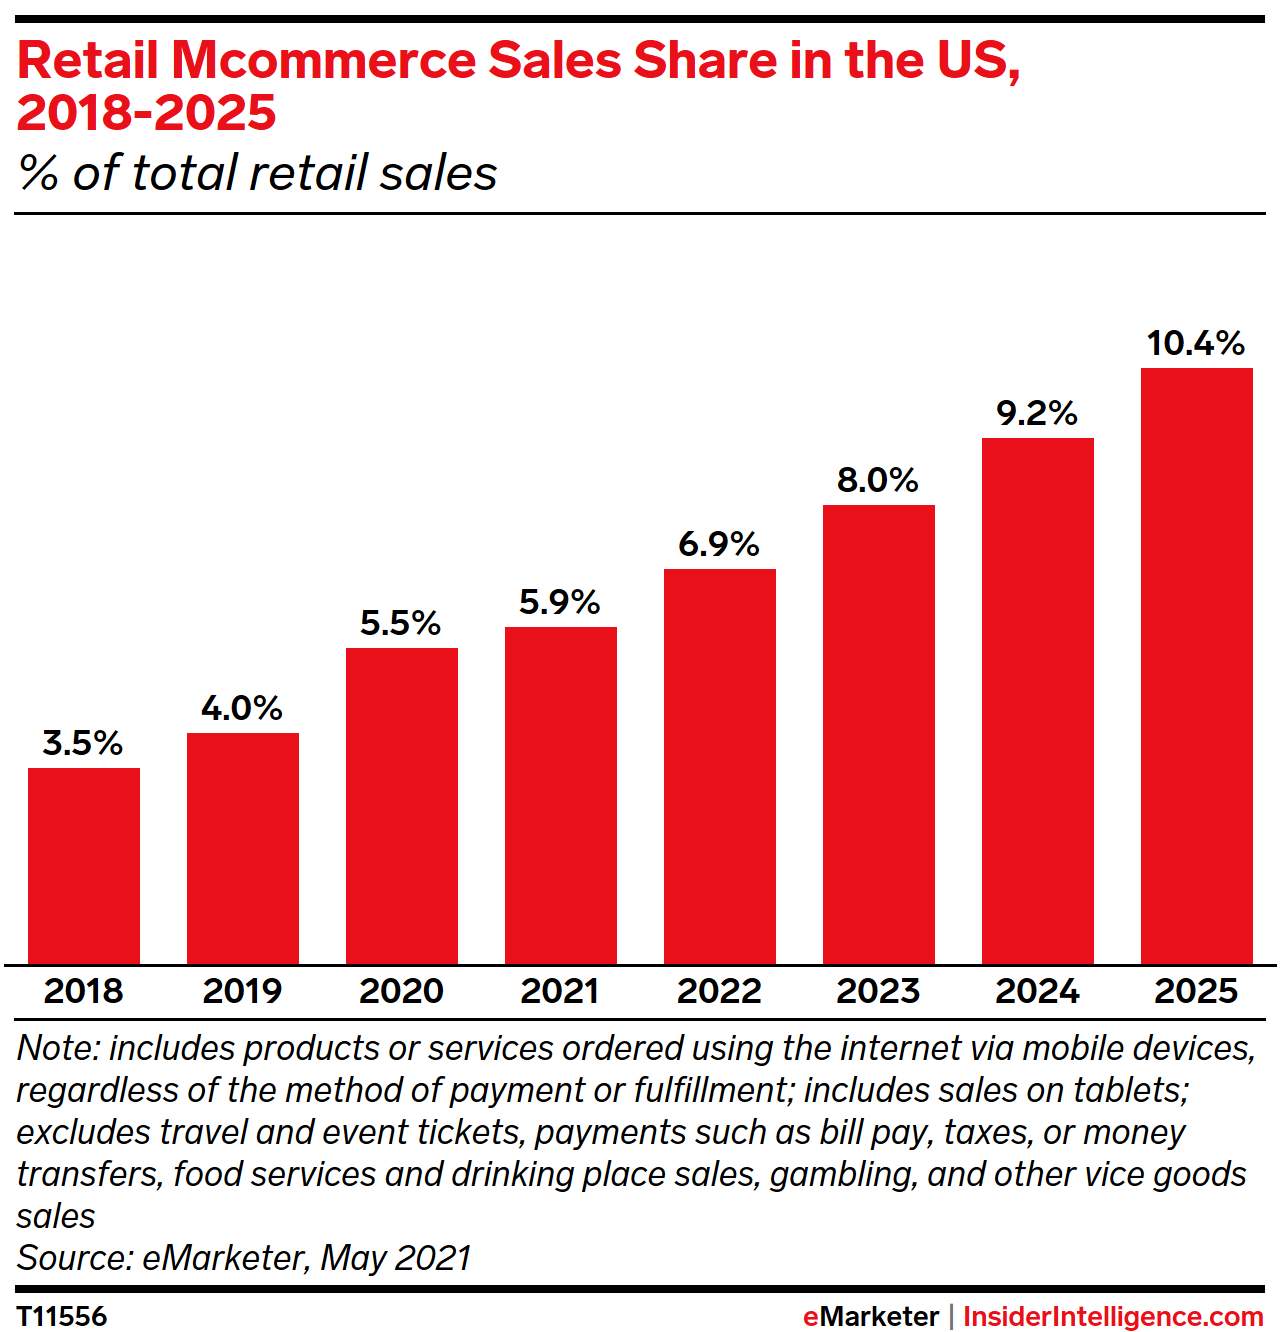 Retail Mcommerce Sales Share in the US, 2018-2025 (% of total retail sales)